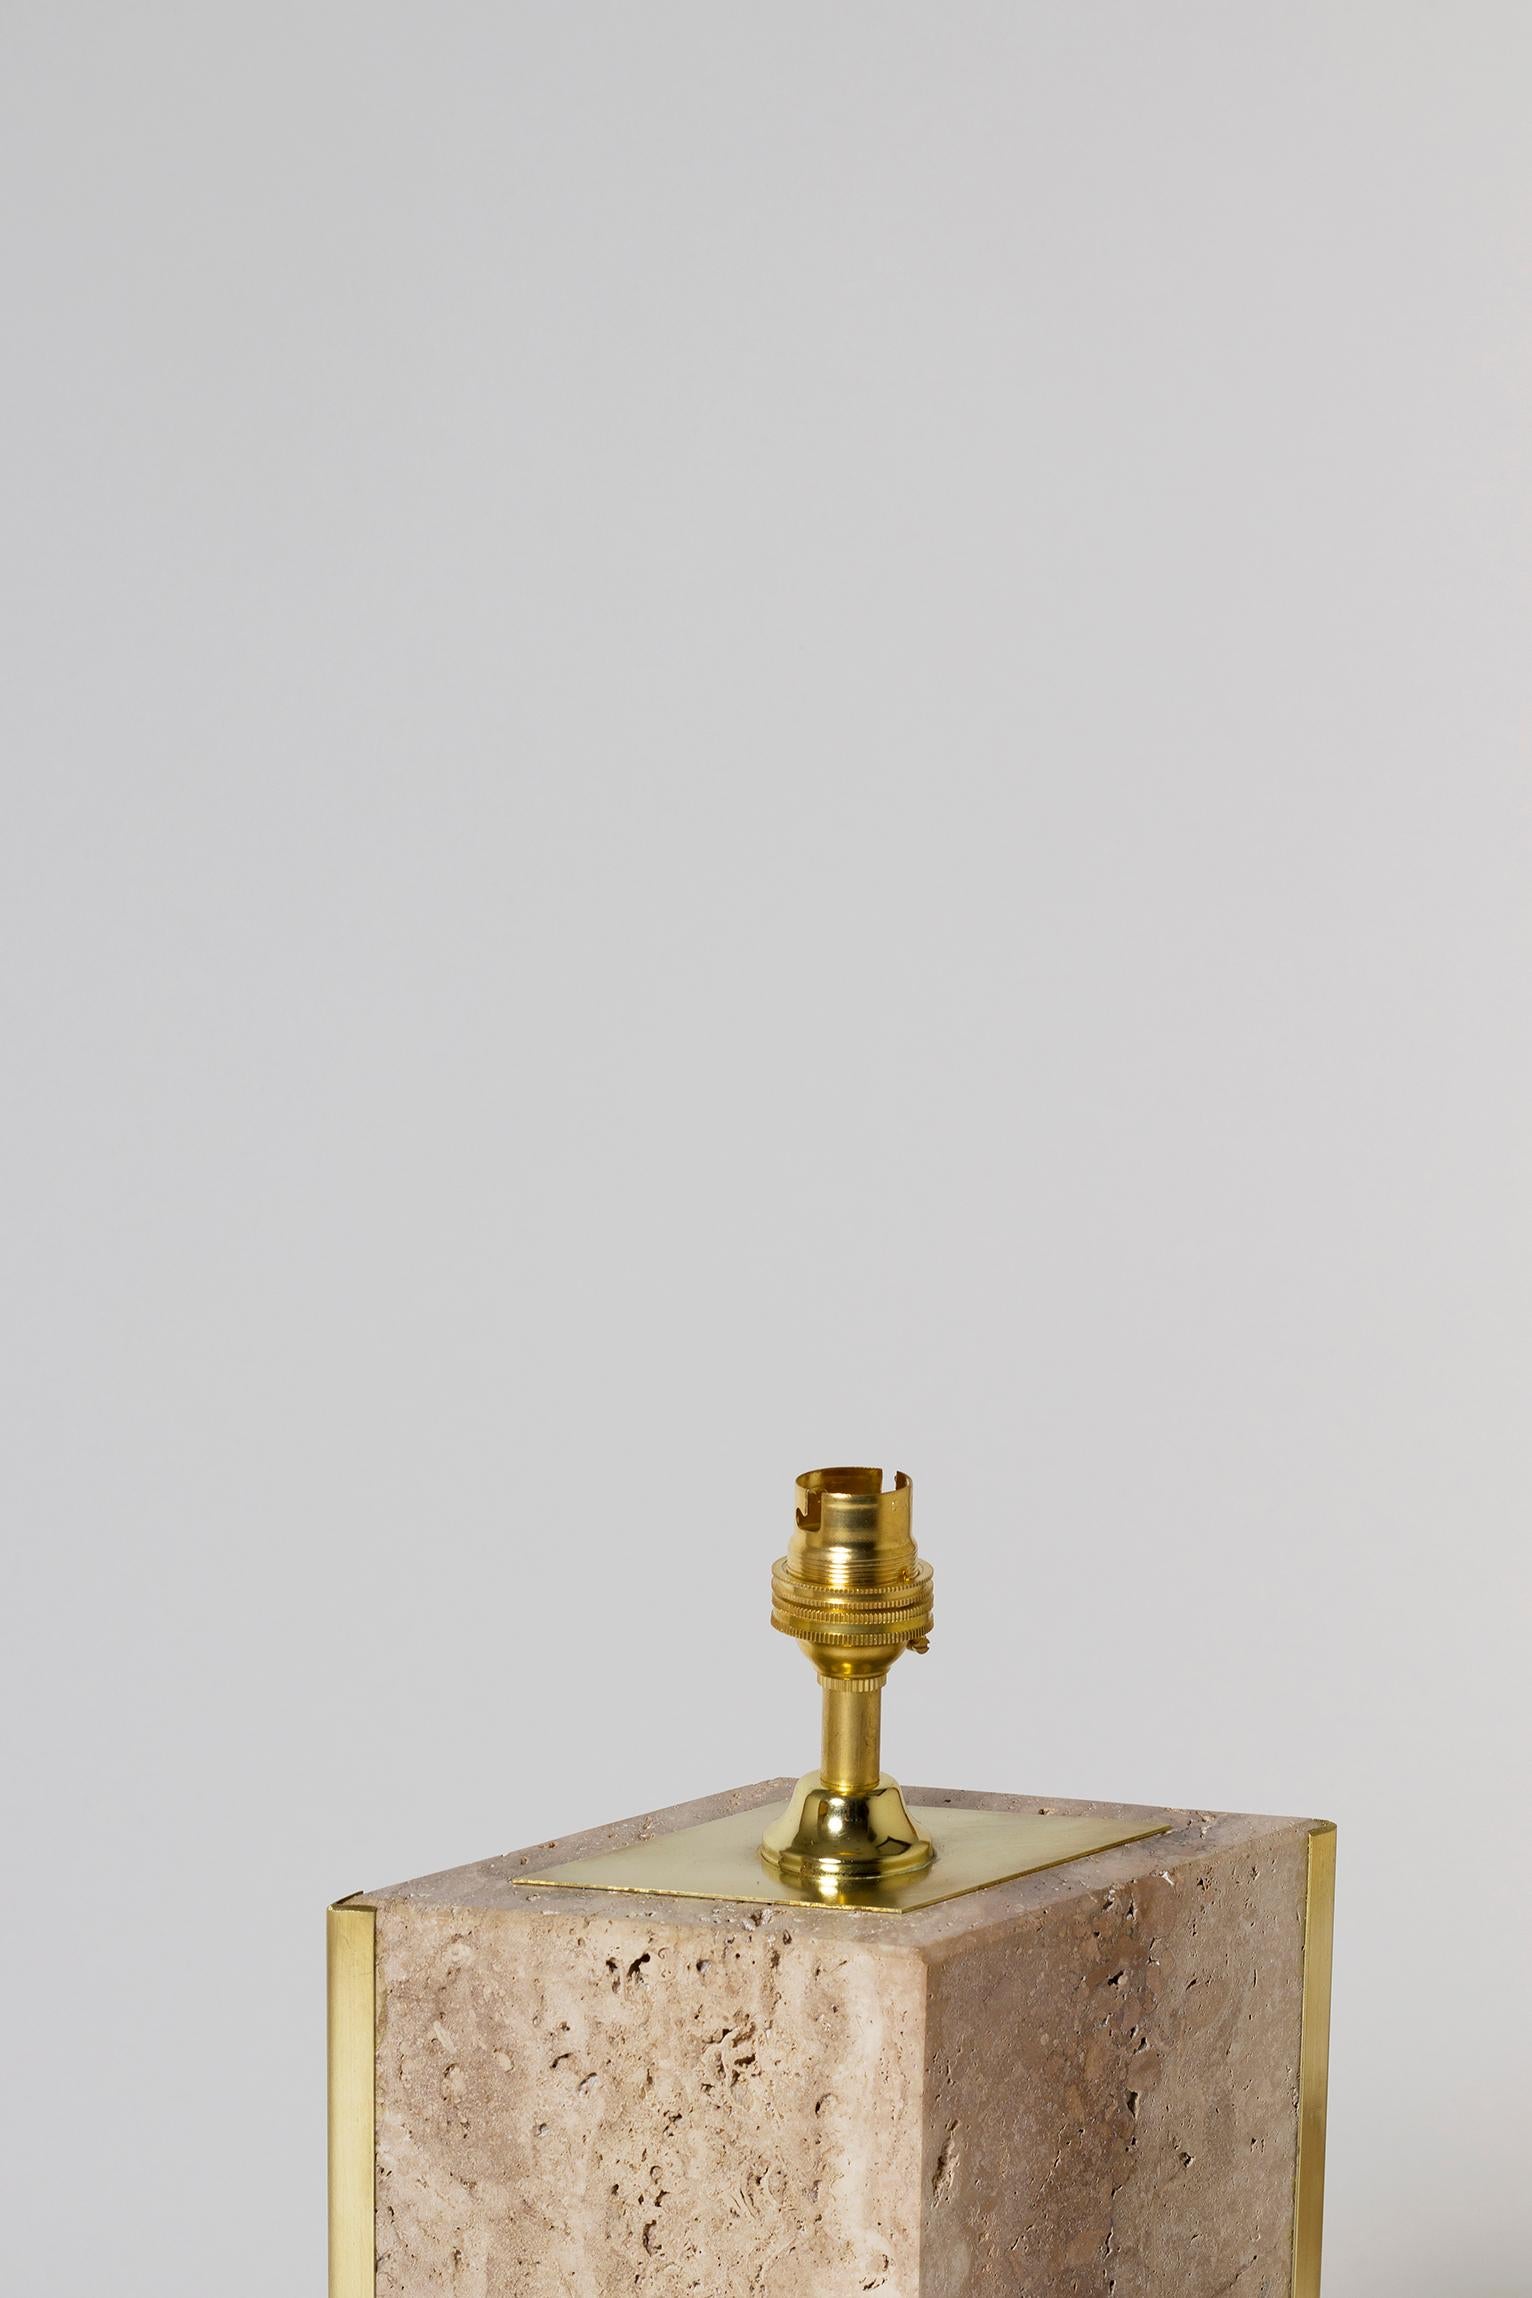 The 'Marine' Travertine and Brass Table Lamp, by Dorian Caffot de Fawes 1